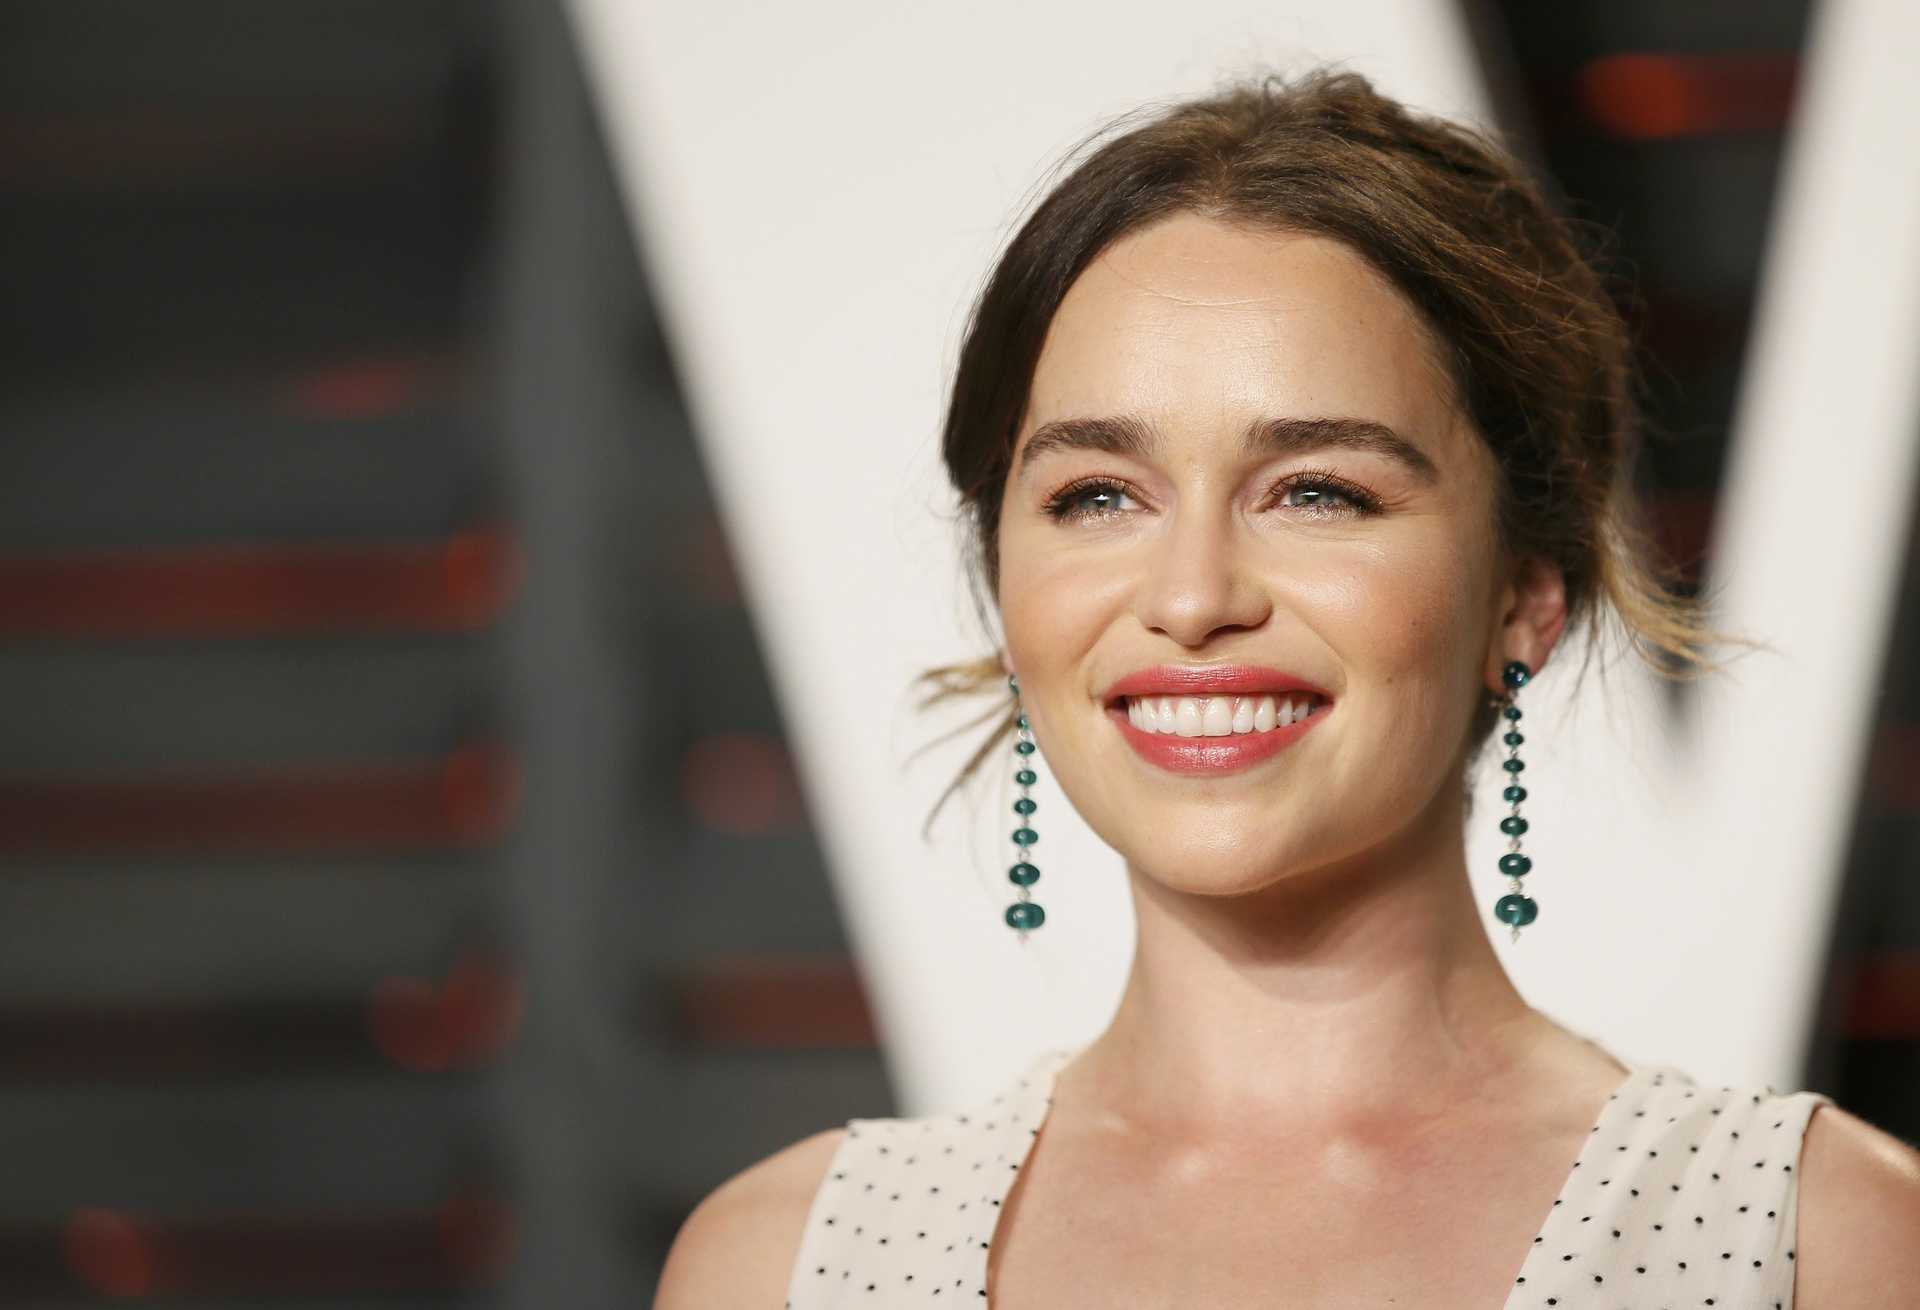 Actress Emilia Clarke arrives at the Vanity Fair Oscar Party in Beverly Hills